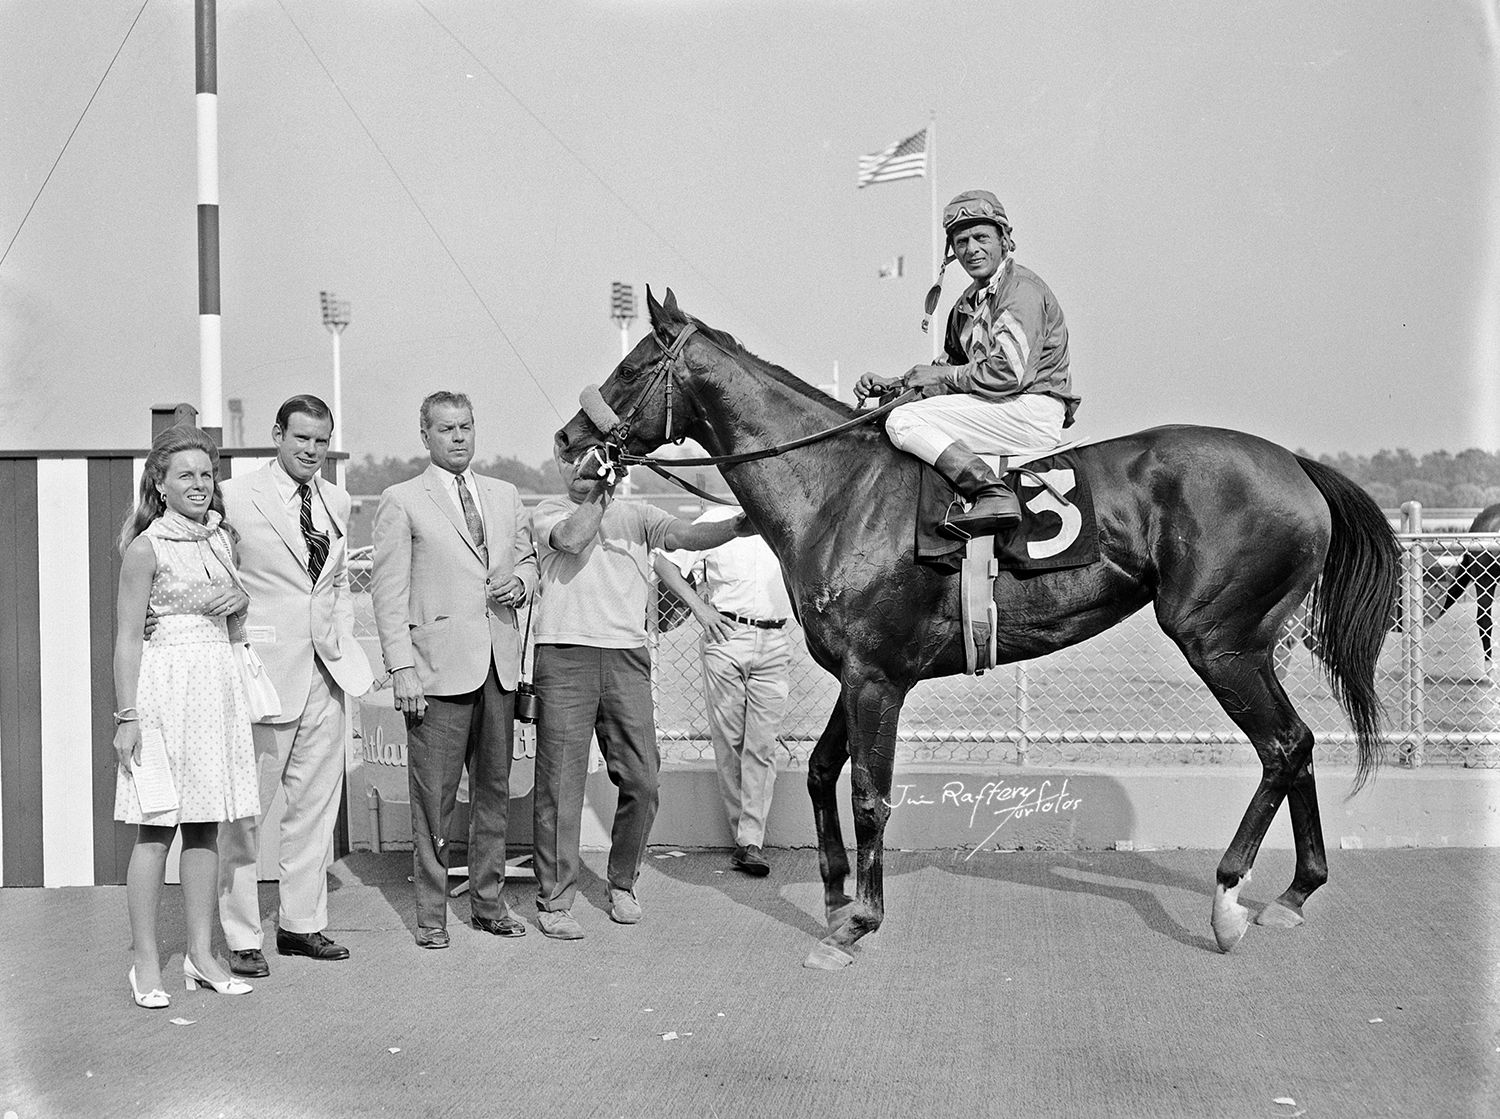 Pas de Nom, after winning the Seashore Stakes at Atlantic City, Aug. 10, 1971. Mr. and Mrs. William Farish are at left. Pas de Nom was later the dam of Danzig. (Jim Raftery Turfotos)